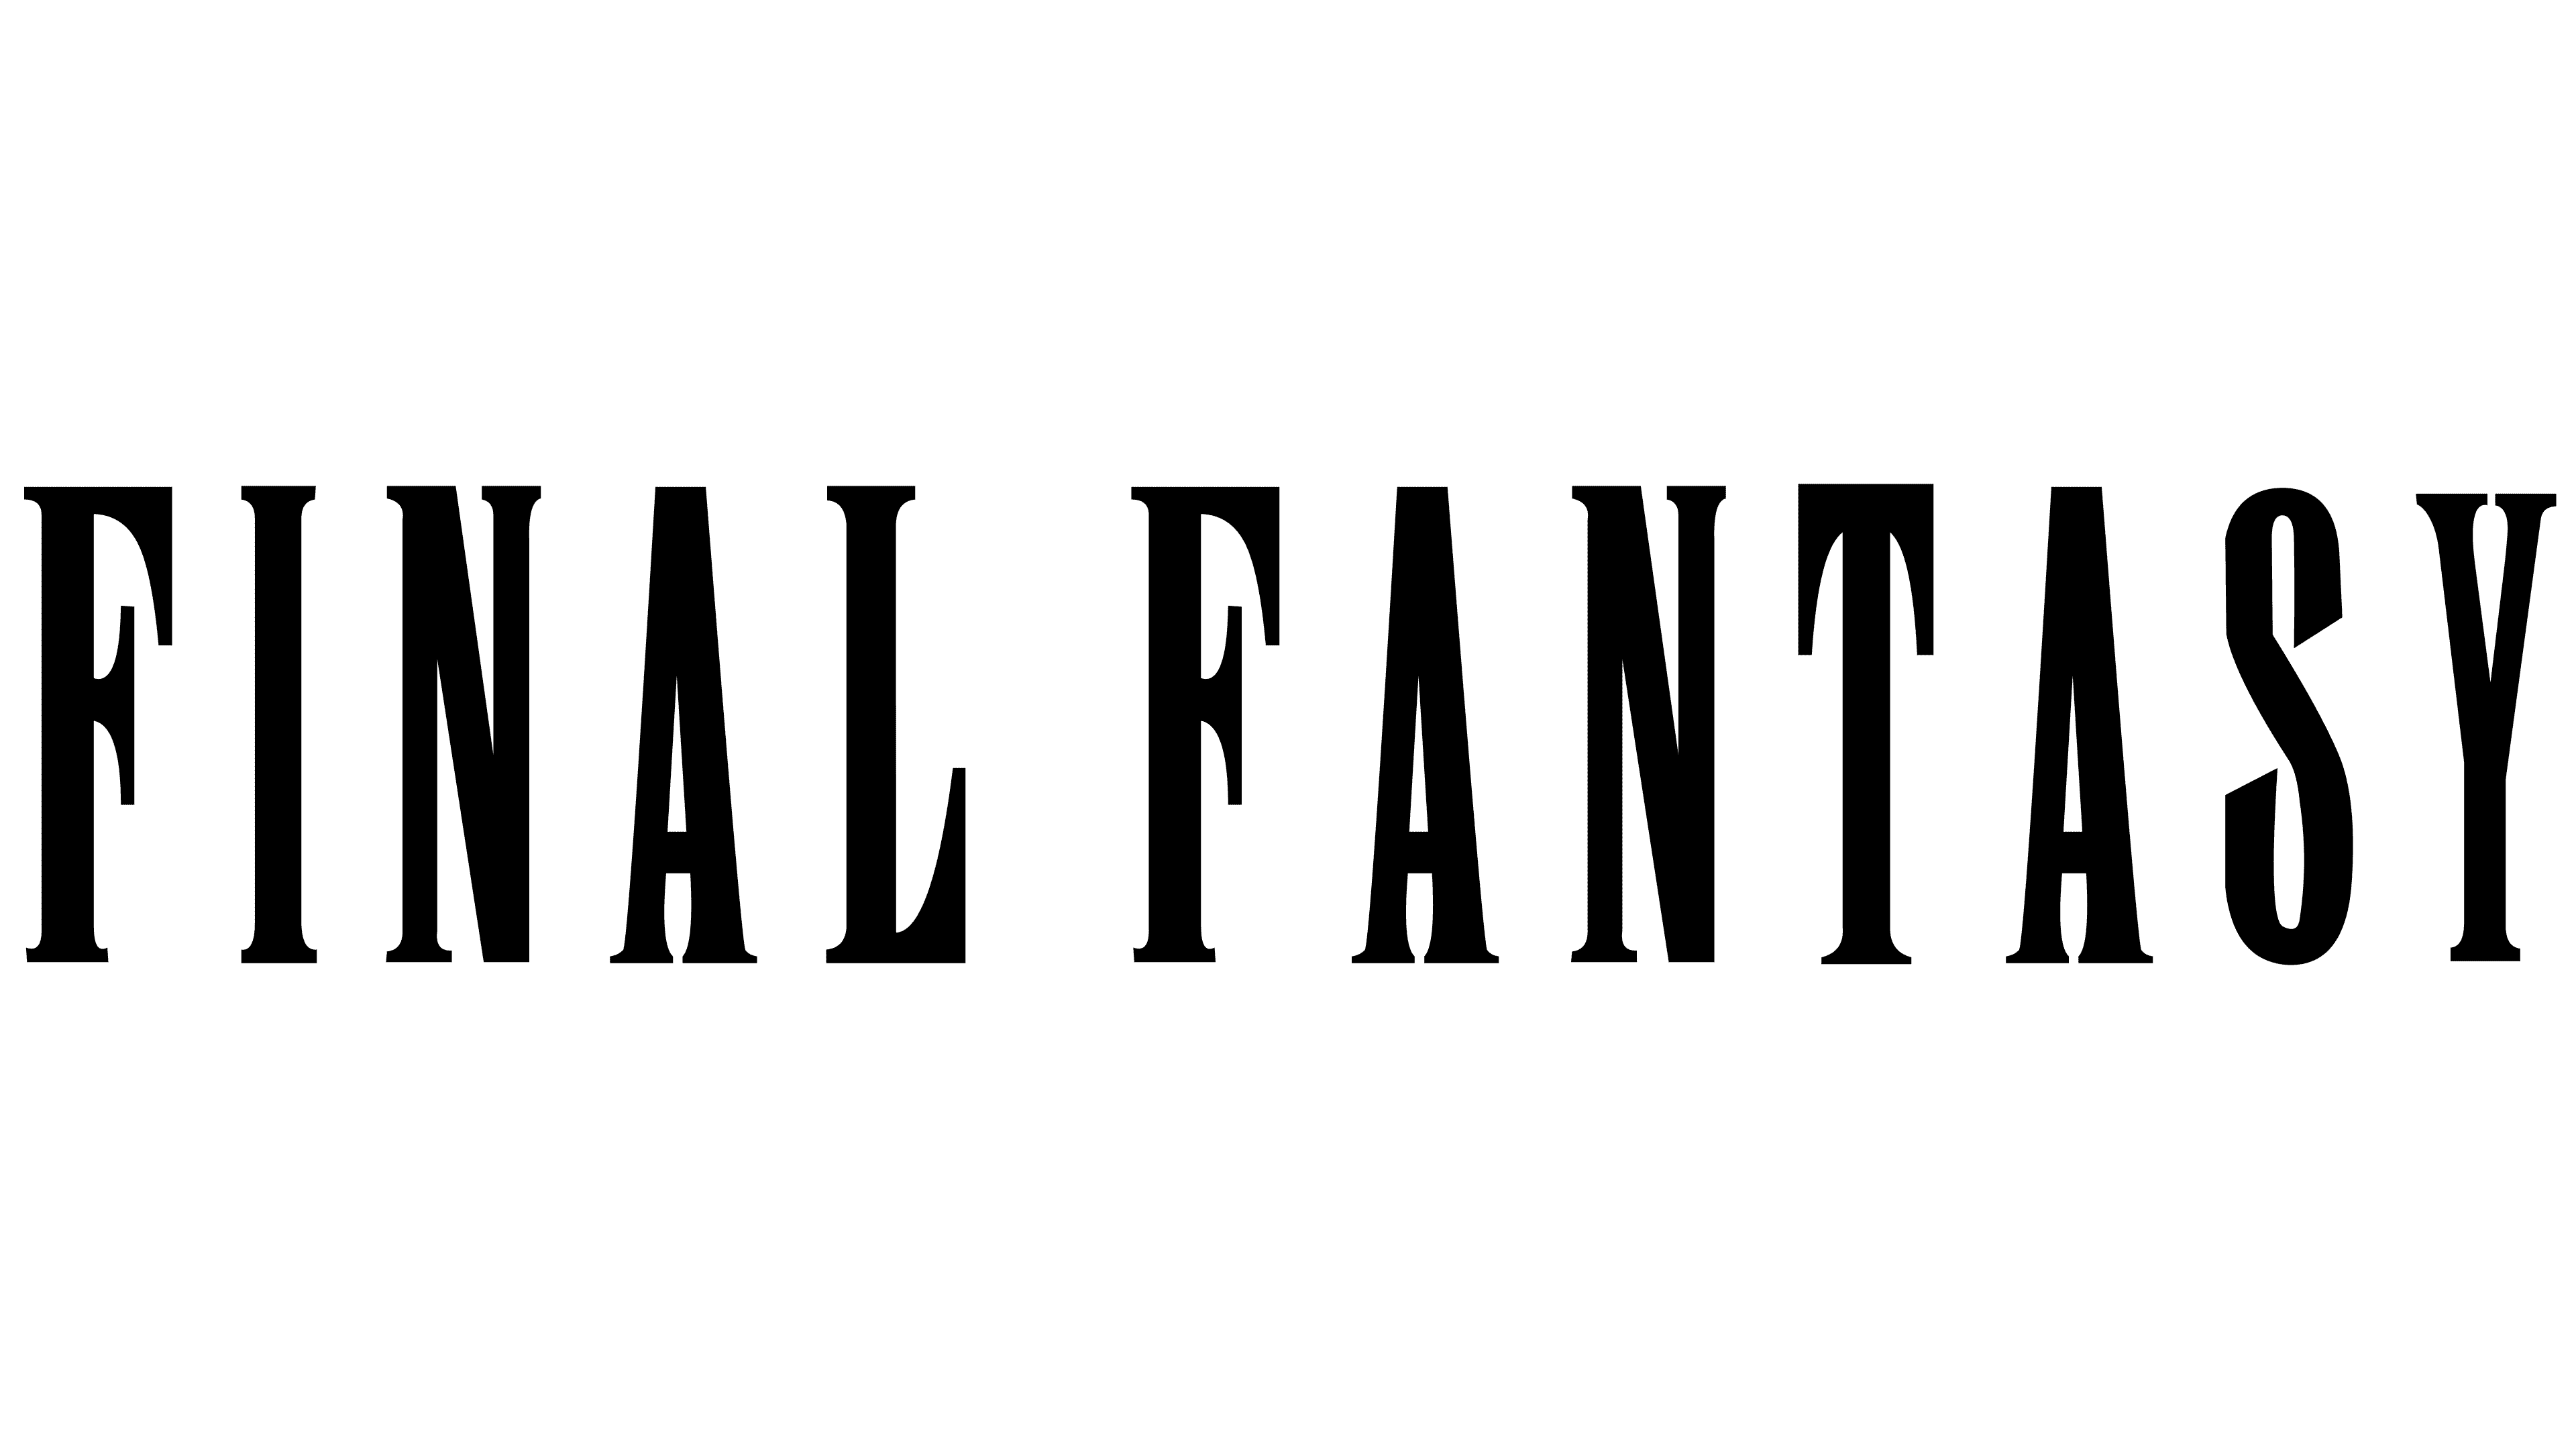 Final fantasy logo in japanese only png